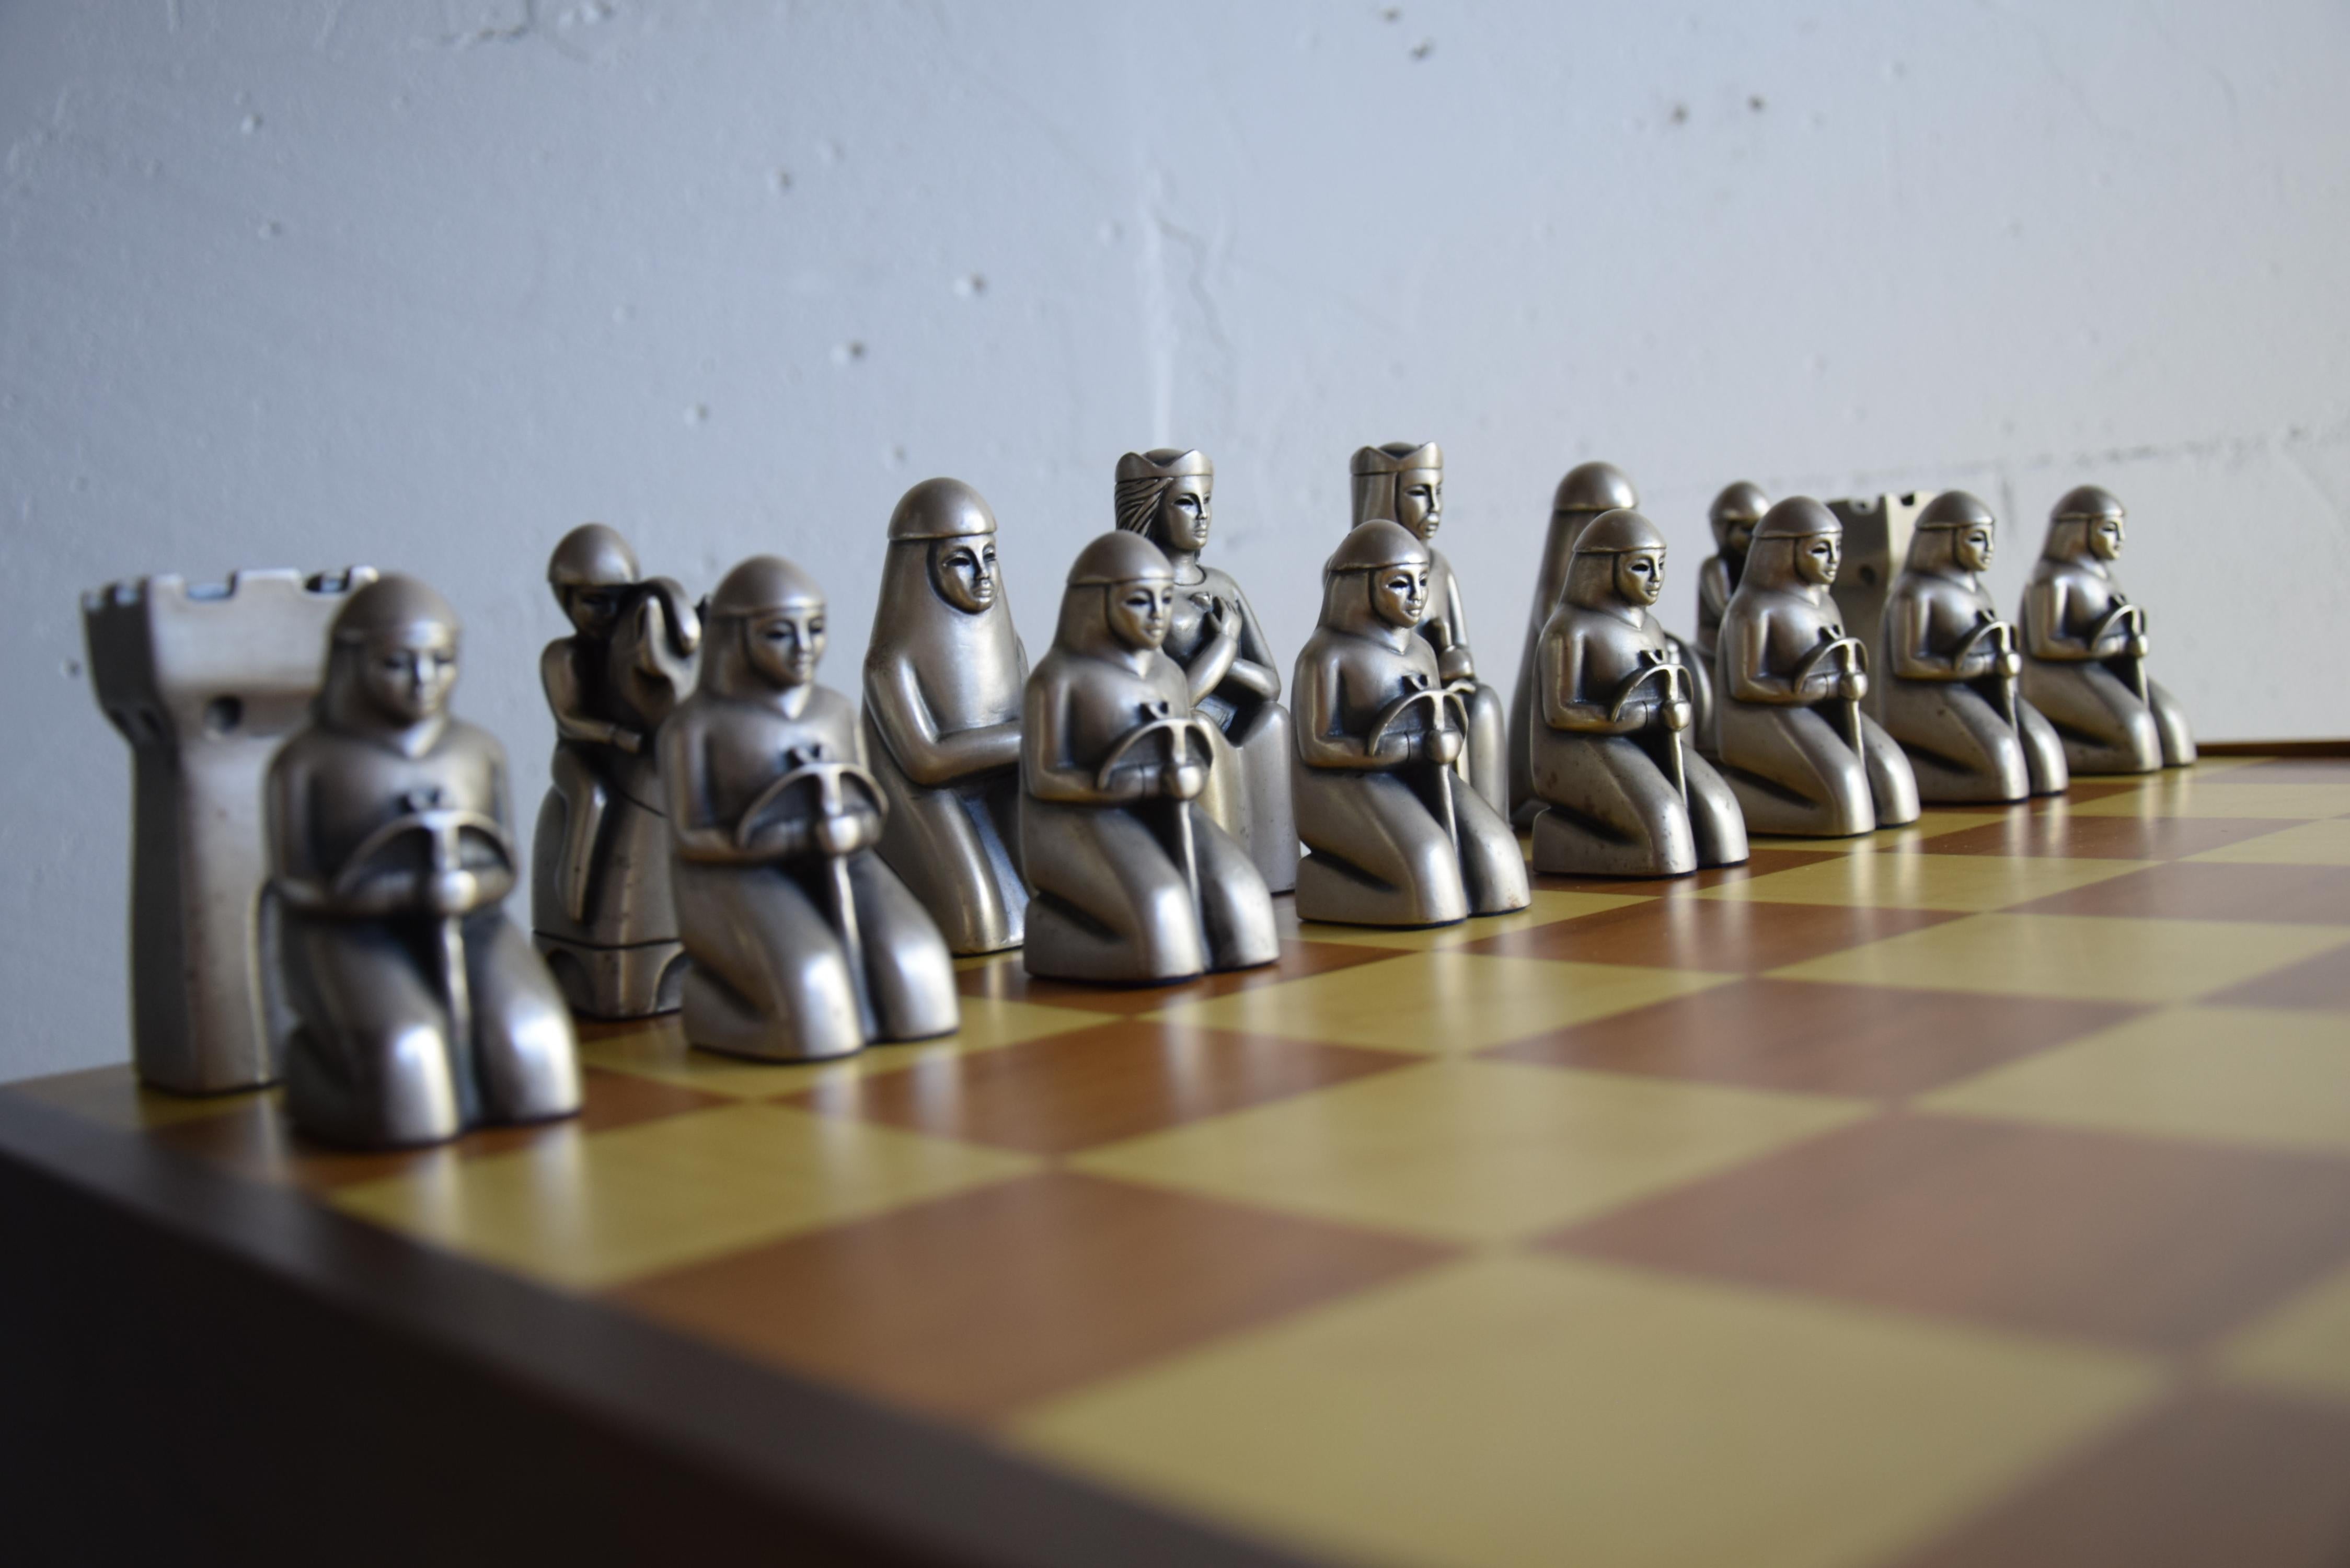 Italian Mid-Century Modern Gold and Silver Chess Set 1